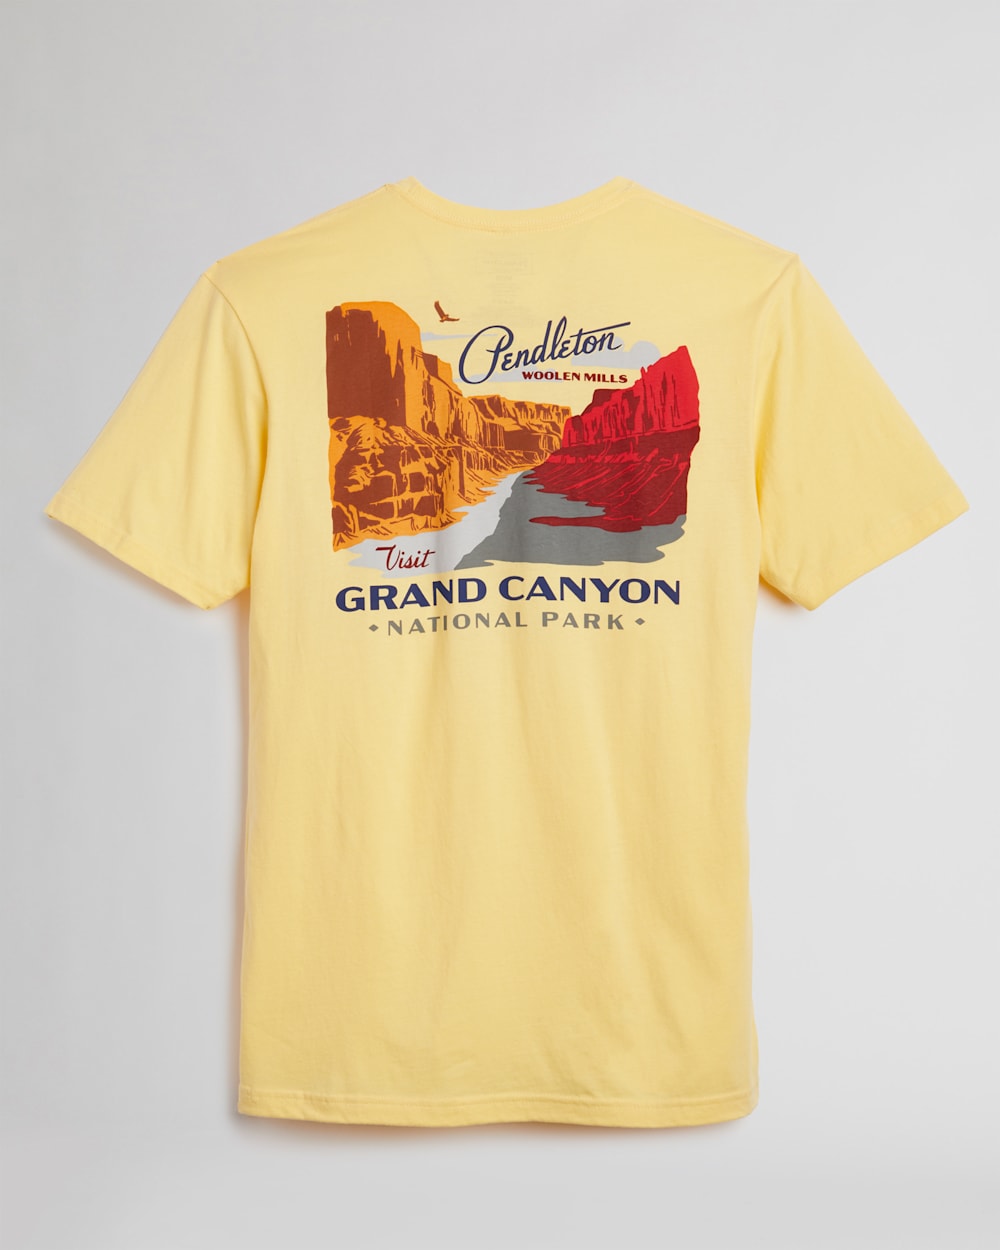 ALTERNATE VIEW OF MEN'S GRAND CANYON GRAPHIC TEE IN YELLOW/ORANGE image number 2